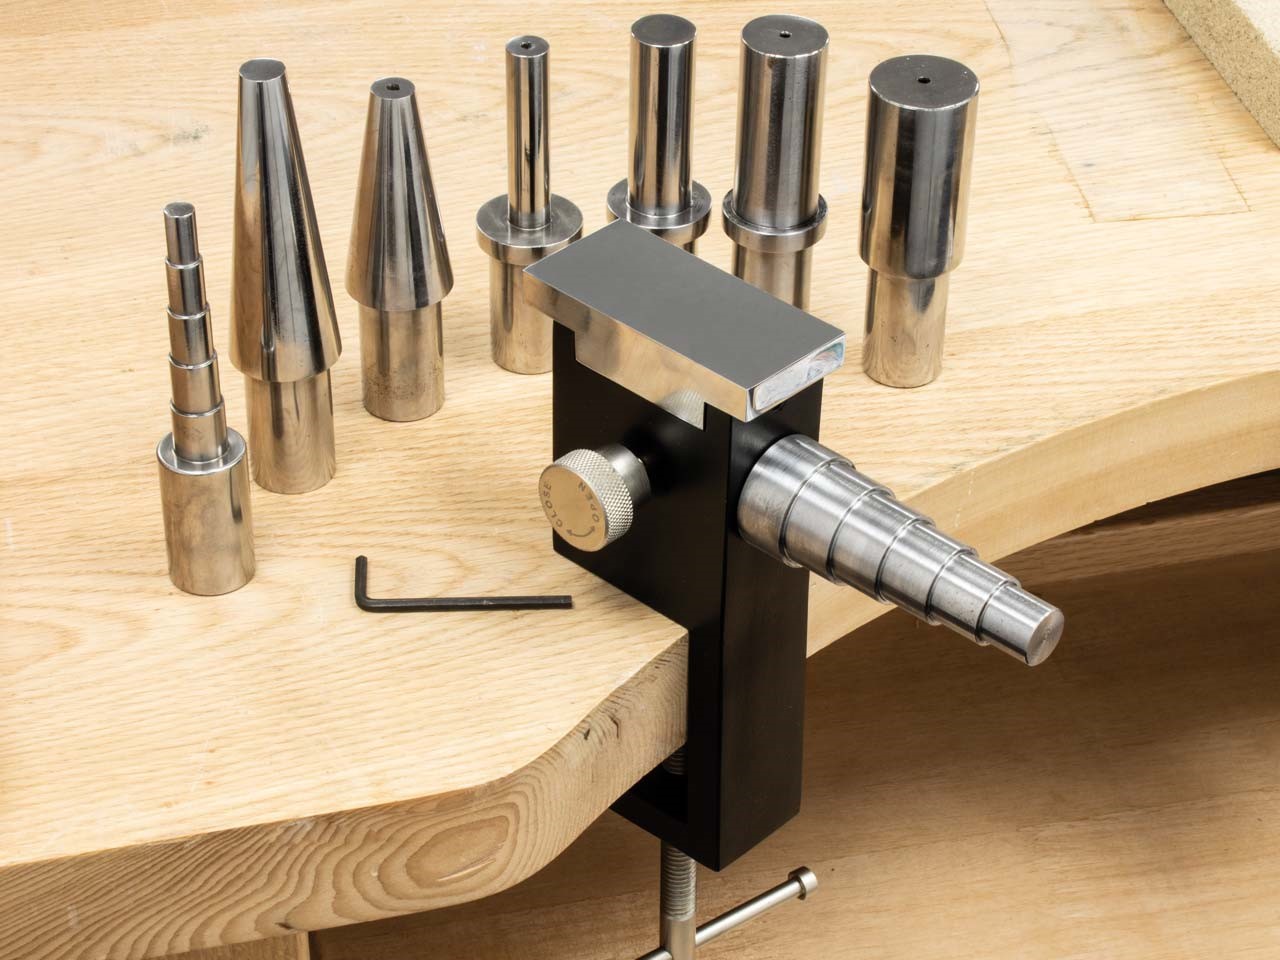 What is a Mandrel Tool?